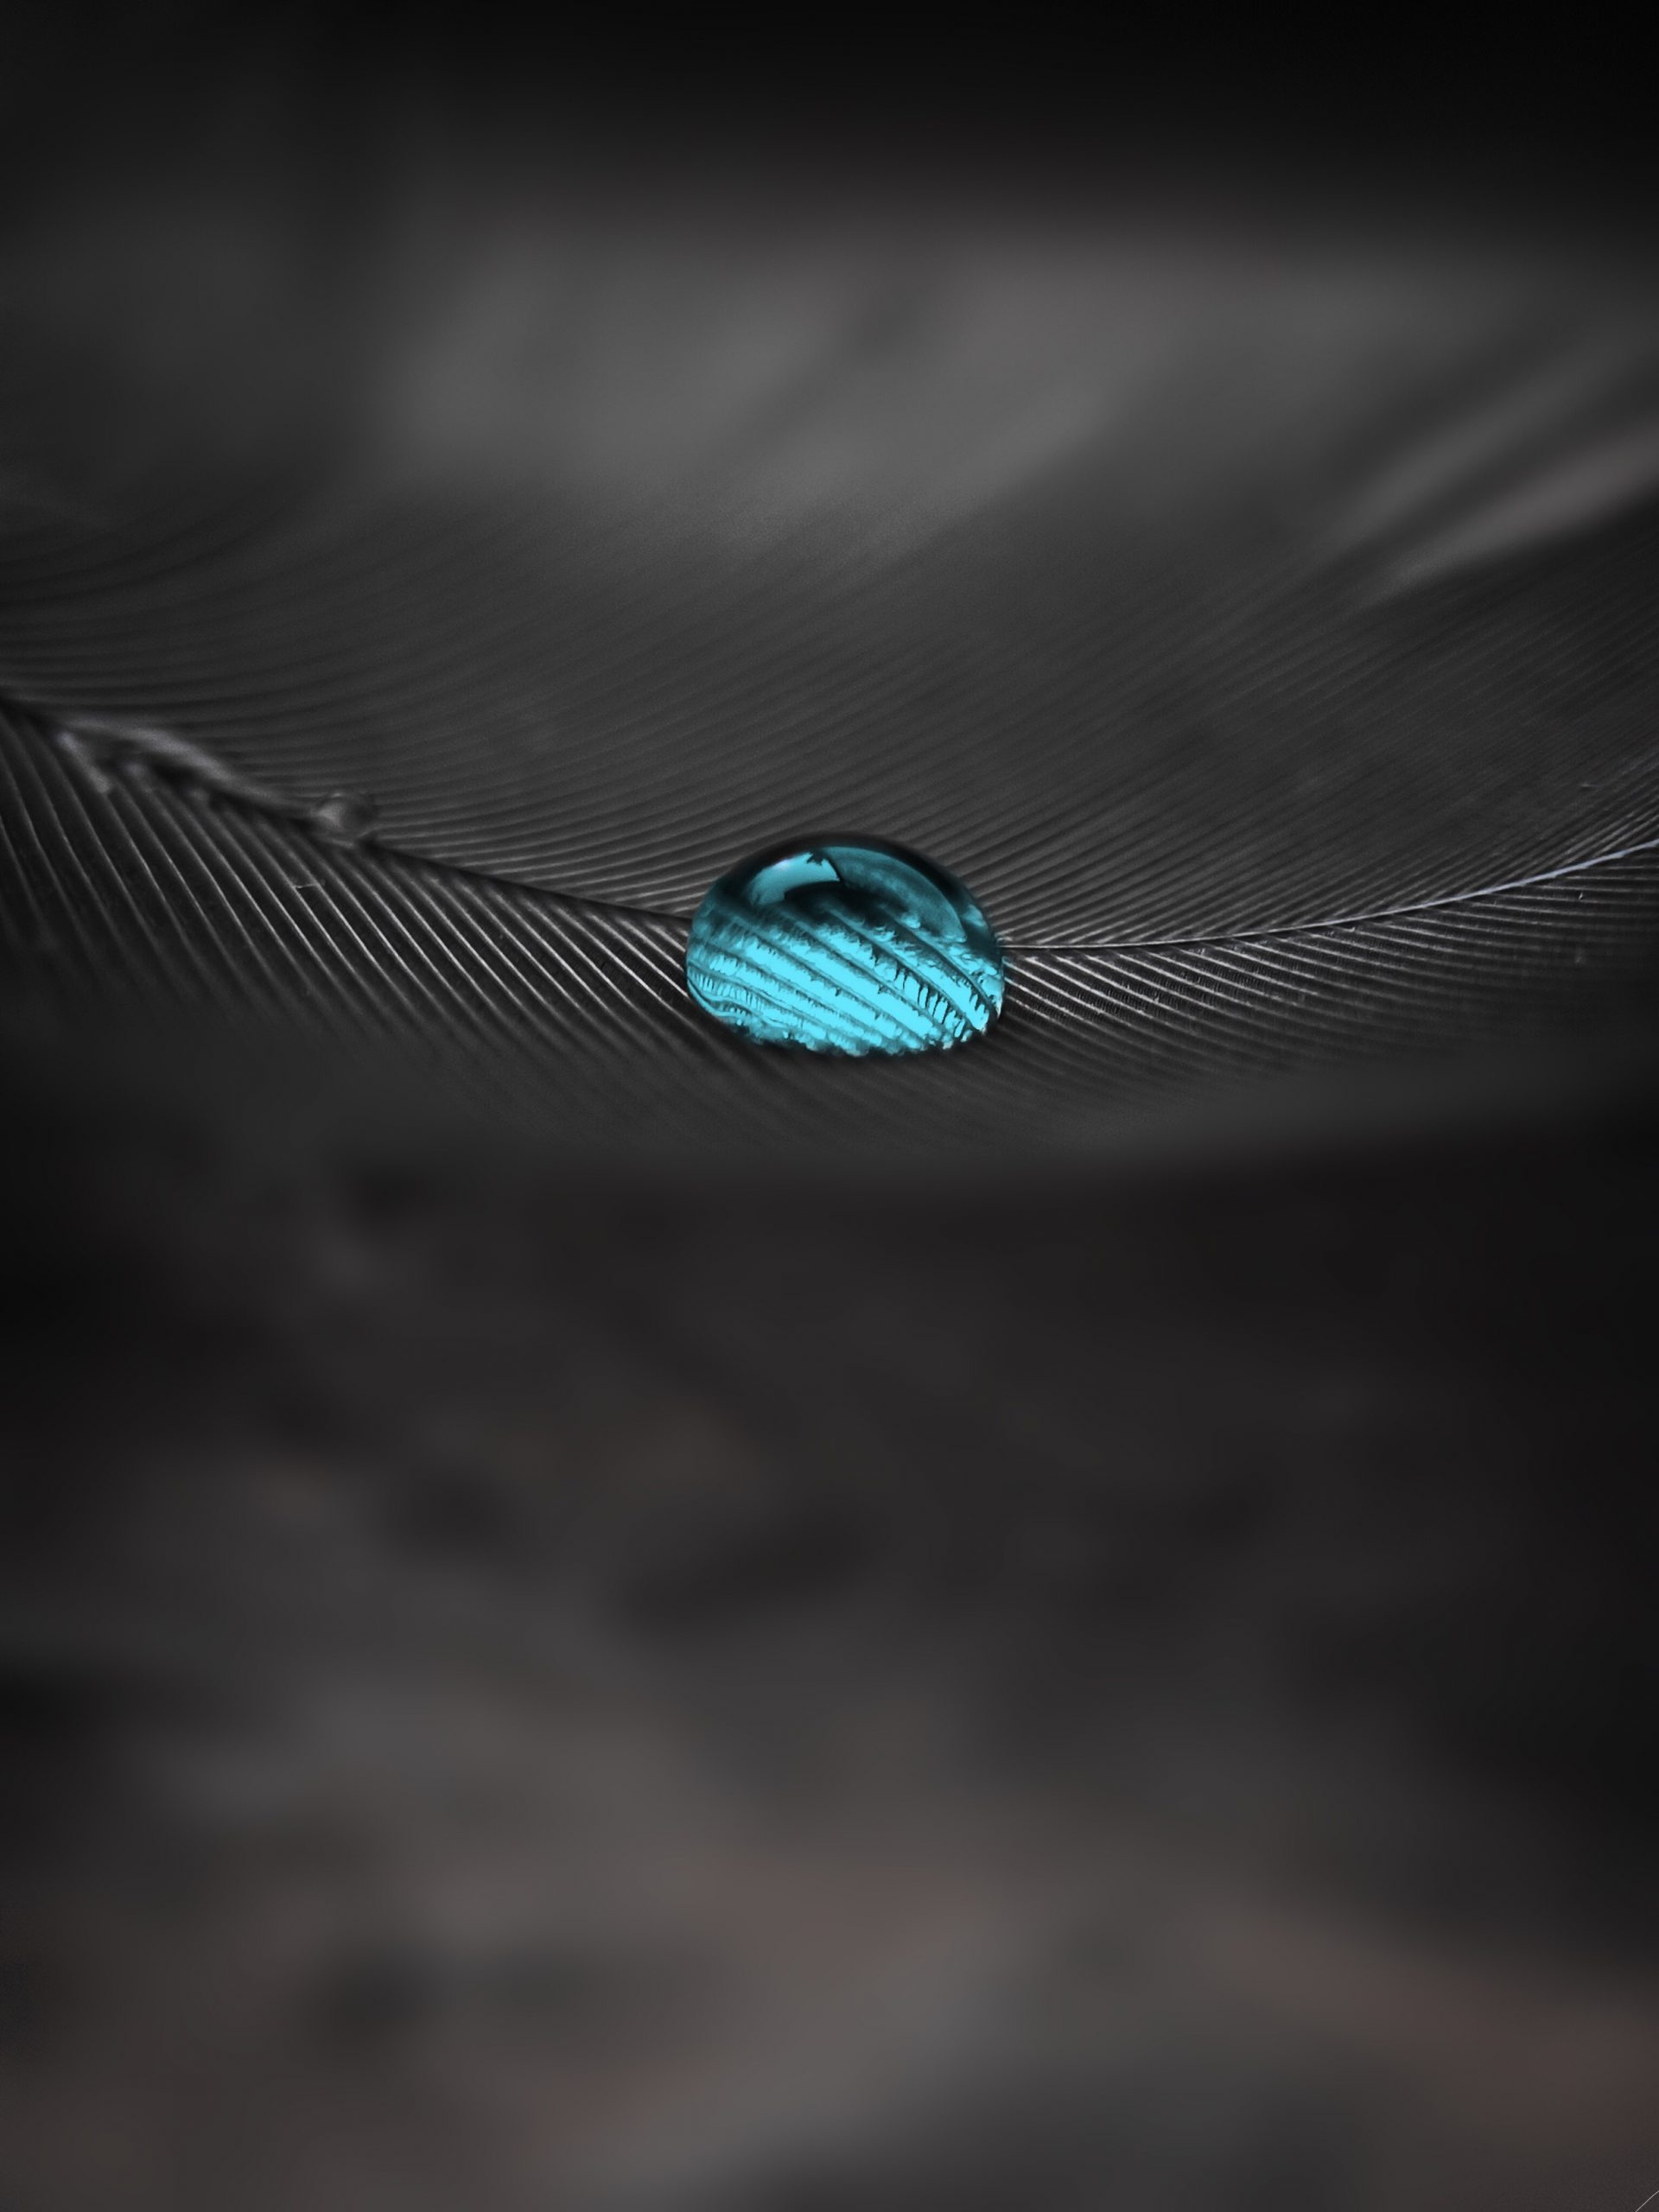 A water drop on a feather